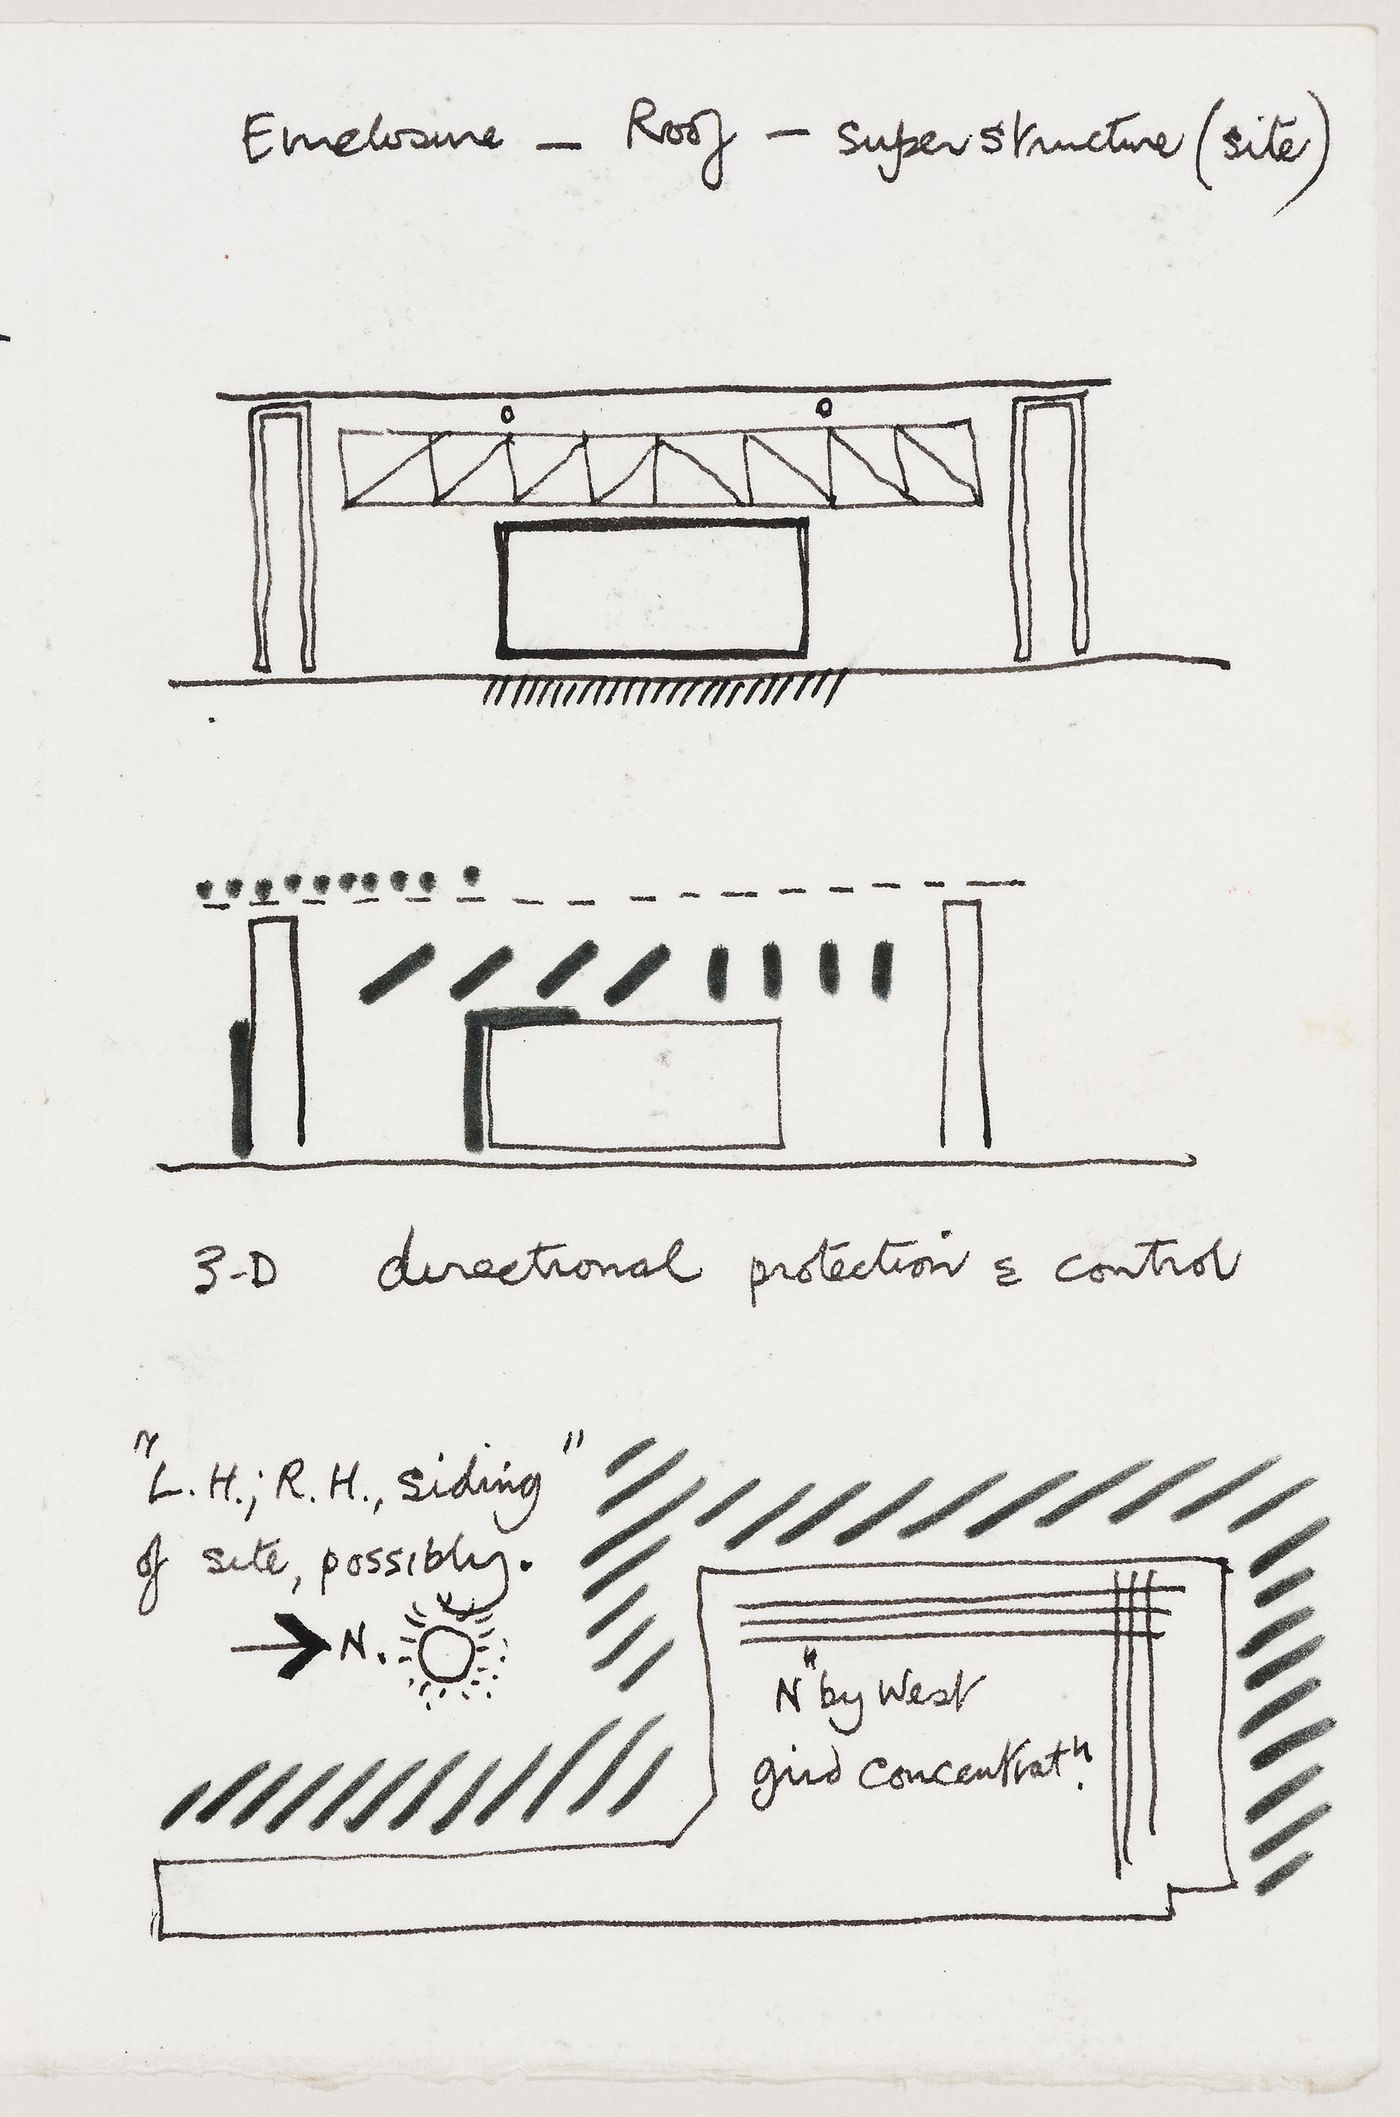 Perthut House: sketches for an enclosure for the site